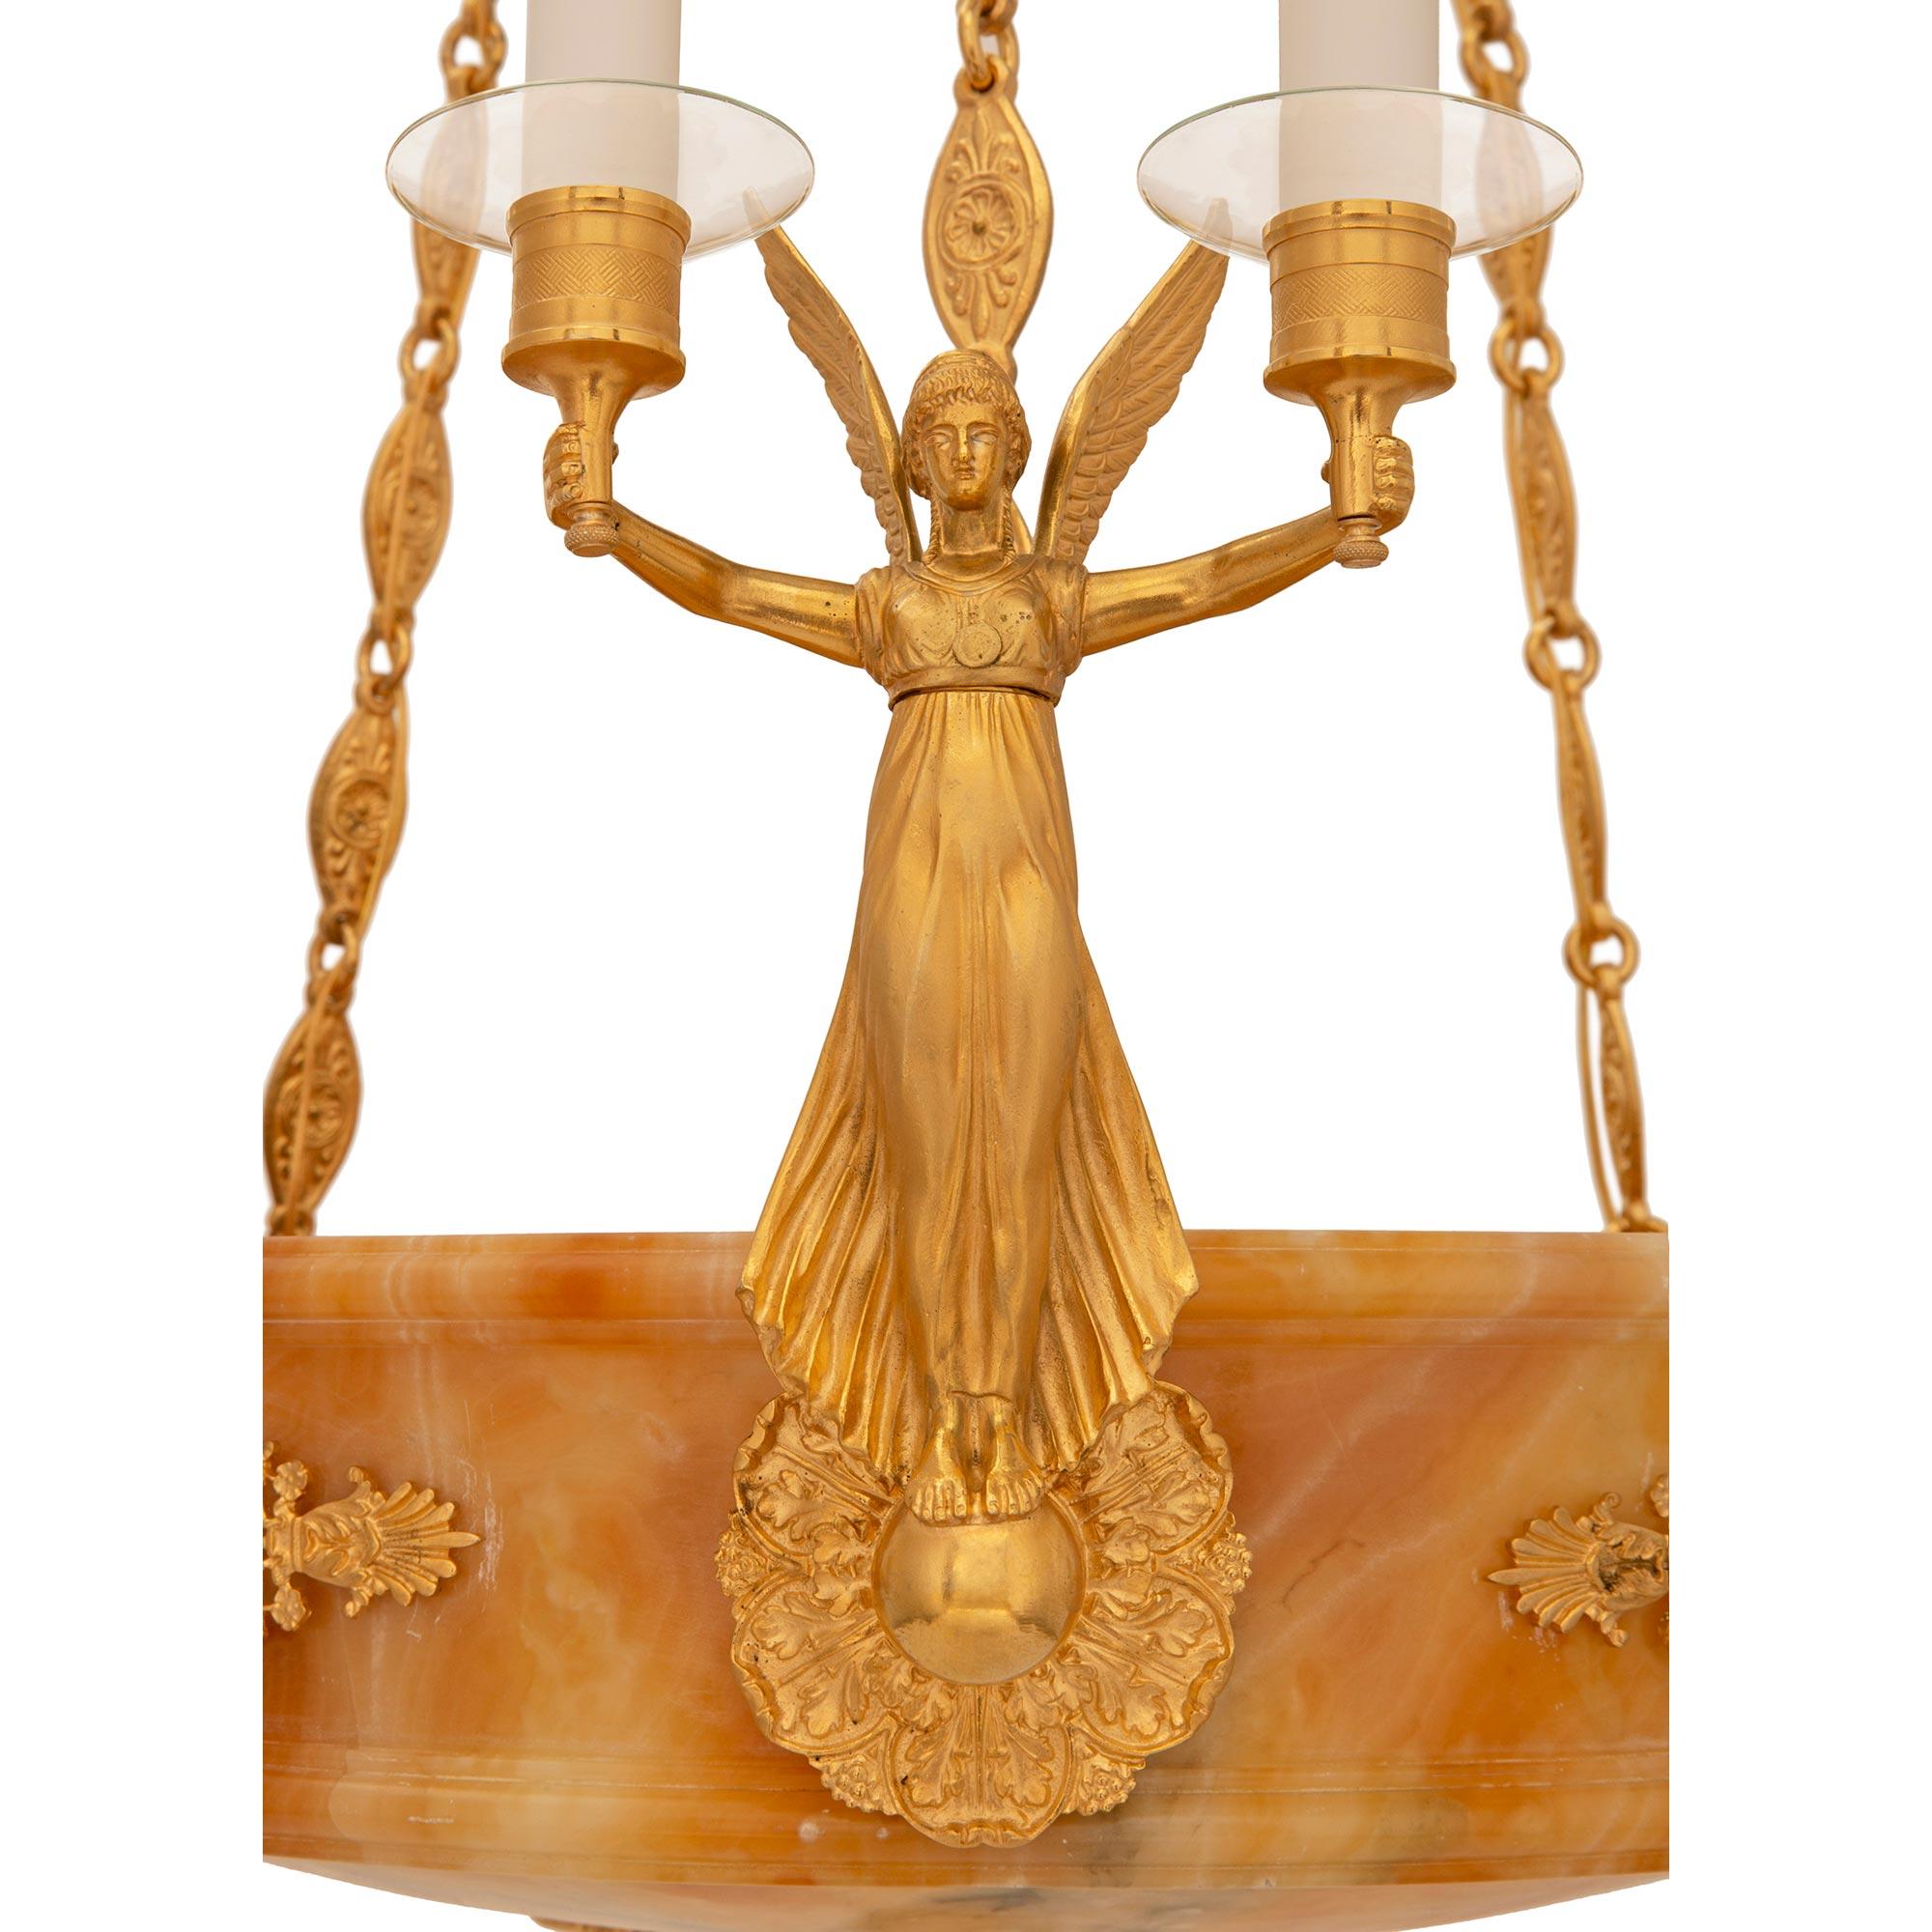 French 19th Century Empire St. Alabaster and Ormolu Chandelier For Sale 1